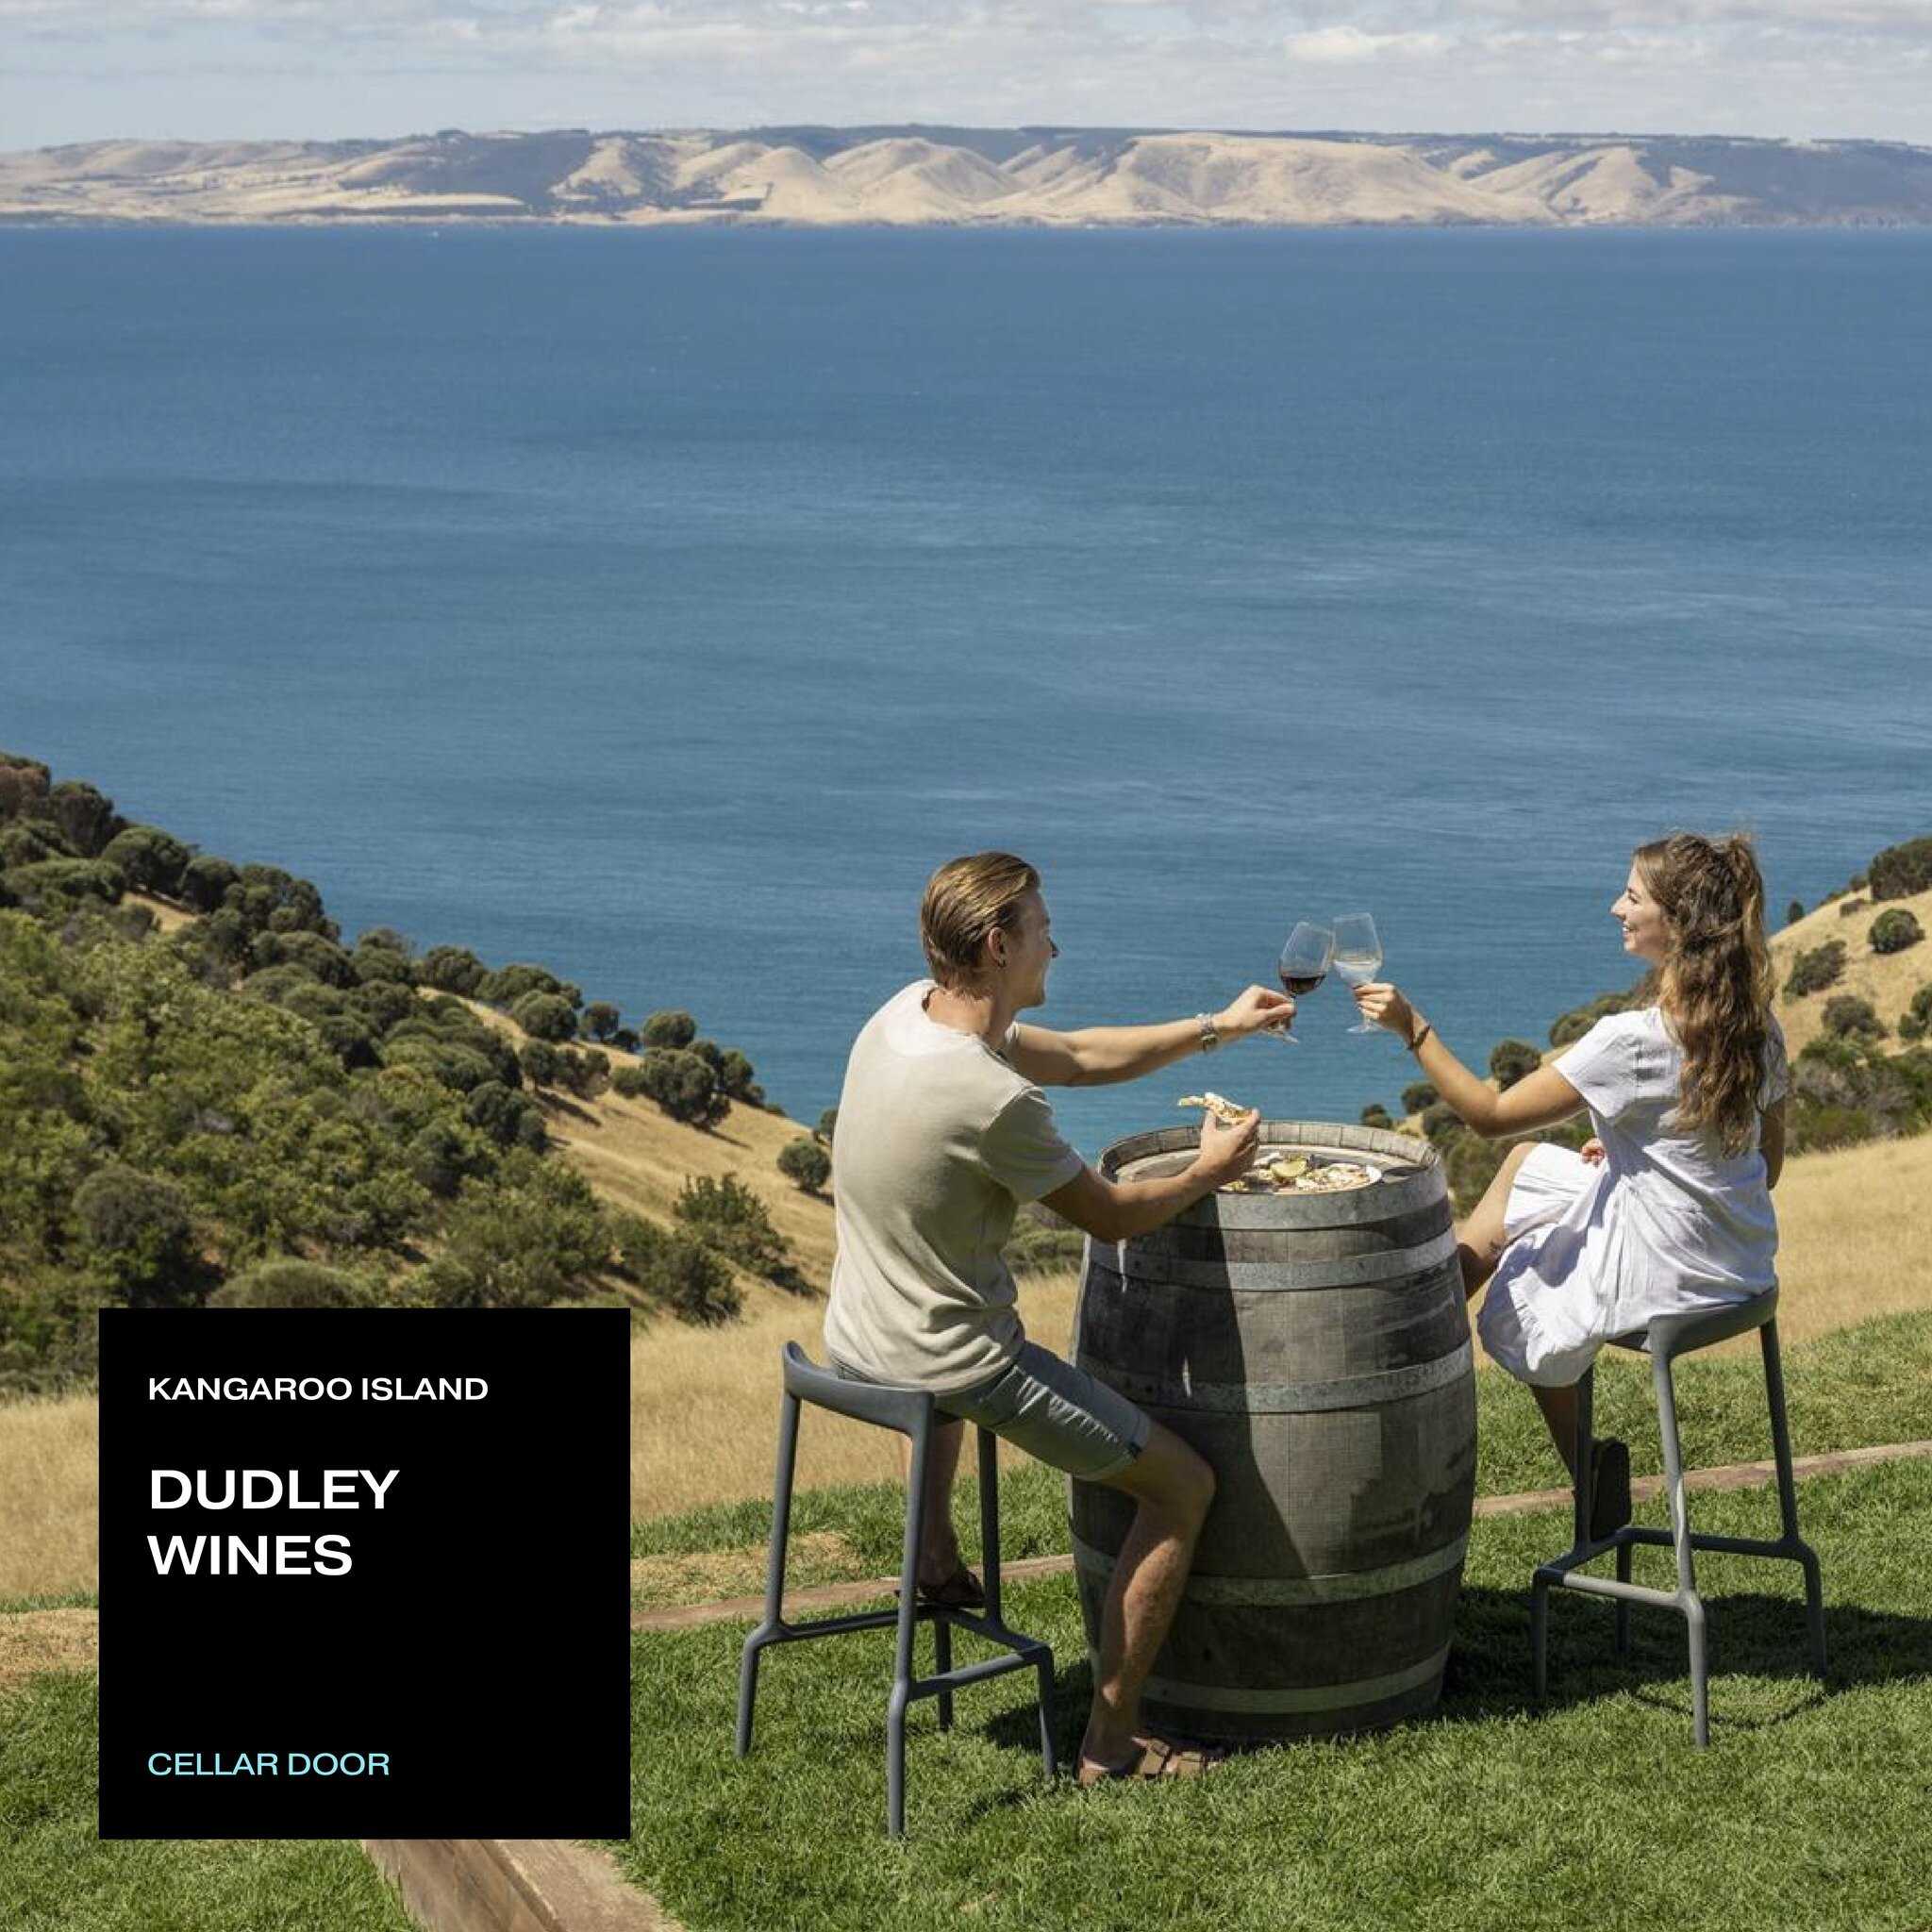 No trip to KI is complete without a visit to @dudleywines! And boy is it worth the short drive!

With panoramic cliff-top views of the South Australian coastline and the mainland, you&rsquo;ll be mesmerised by the landscape before you&rsquo;re throug